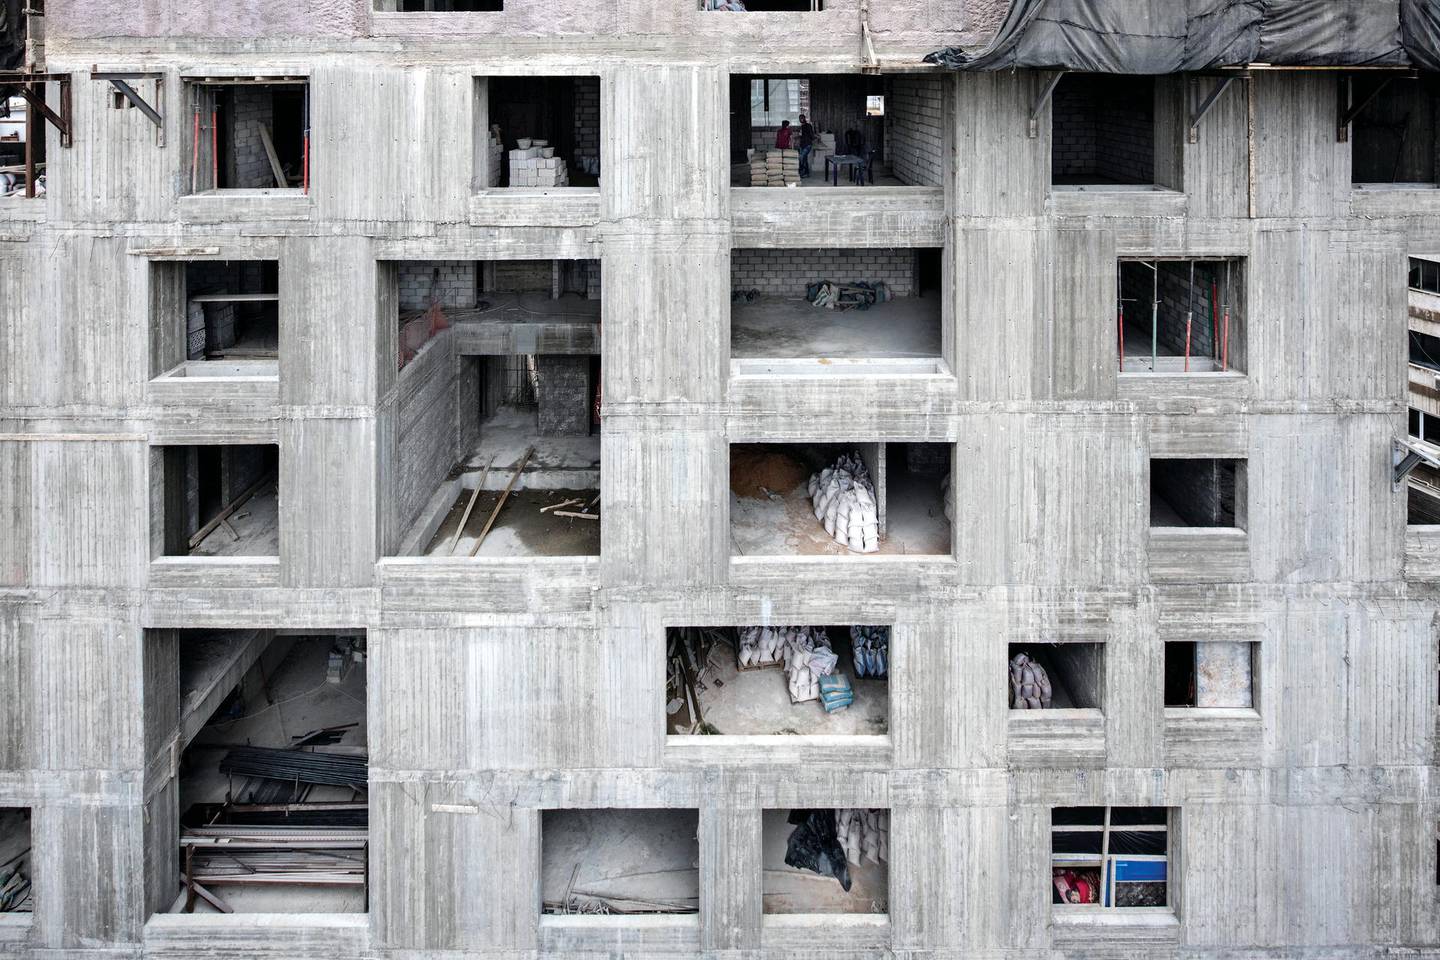 One of the images of a building under construction captures a man asleep on a makeshift bed. Ieva Saudargaite Douaihi